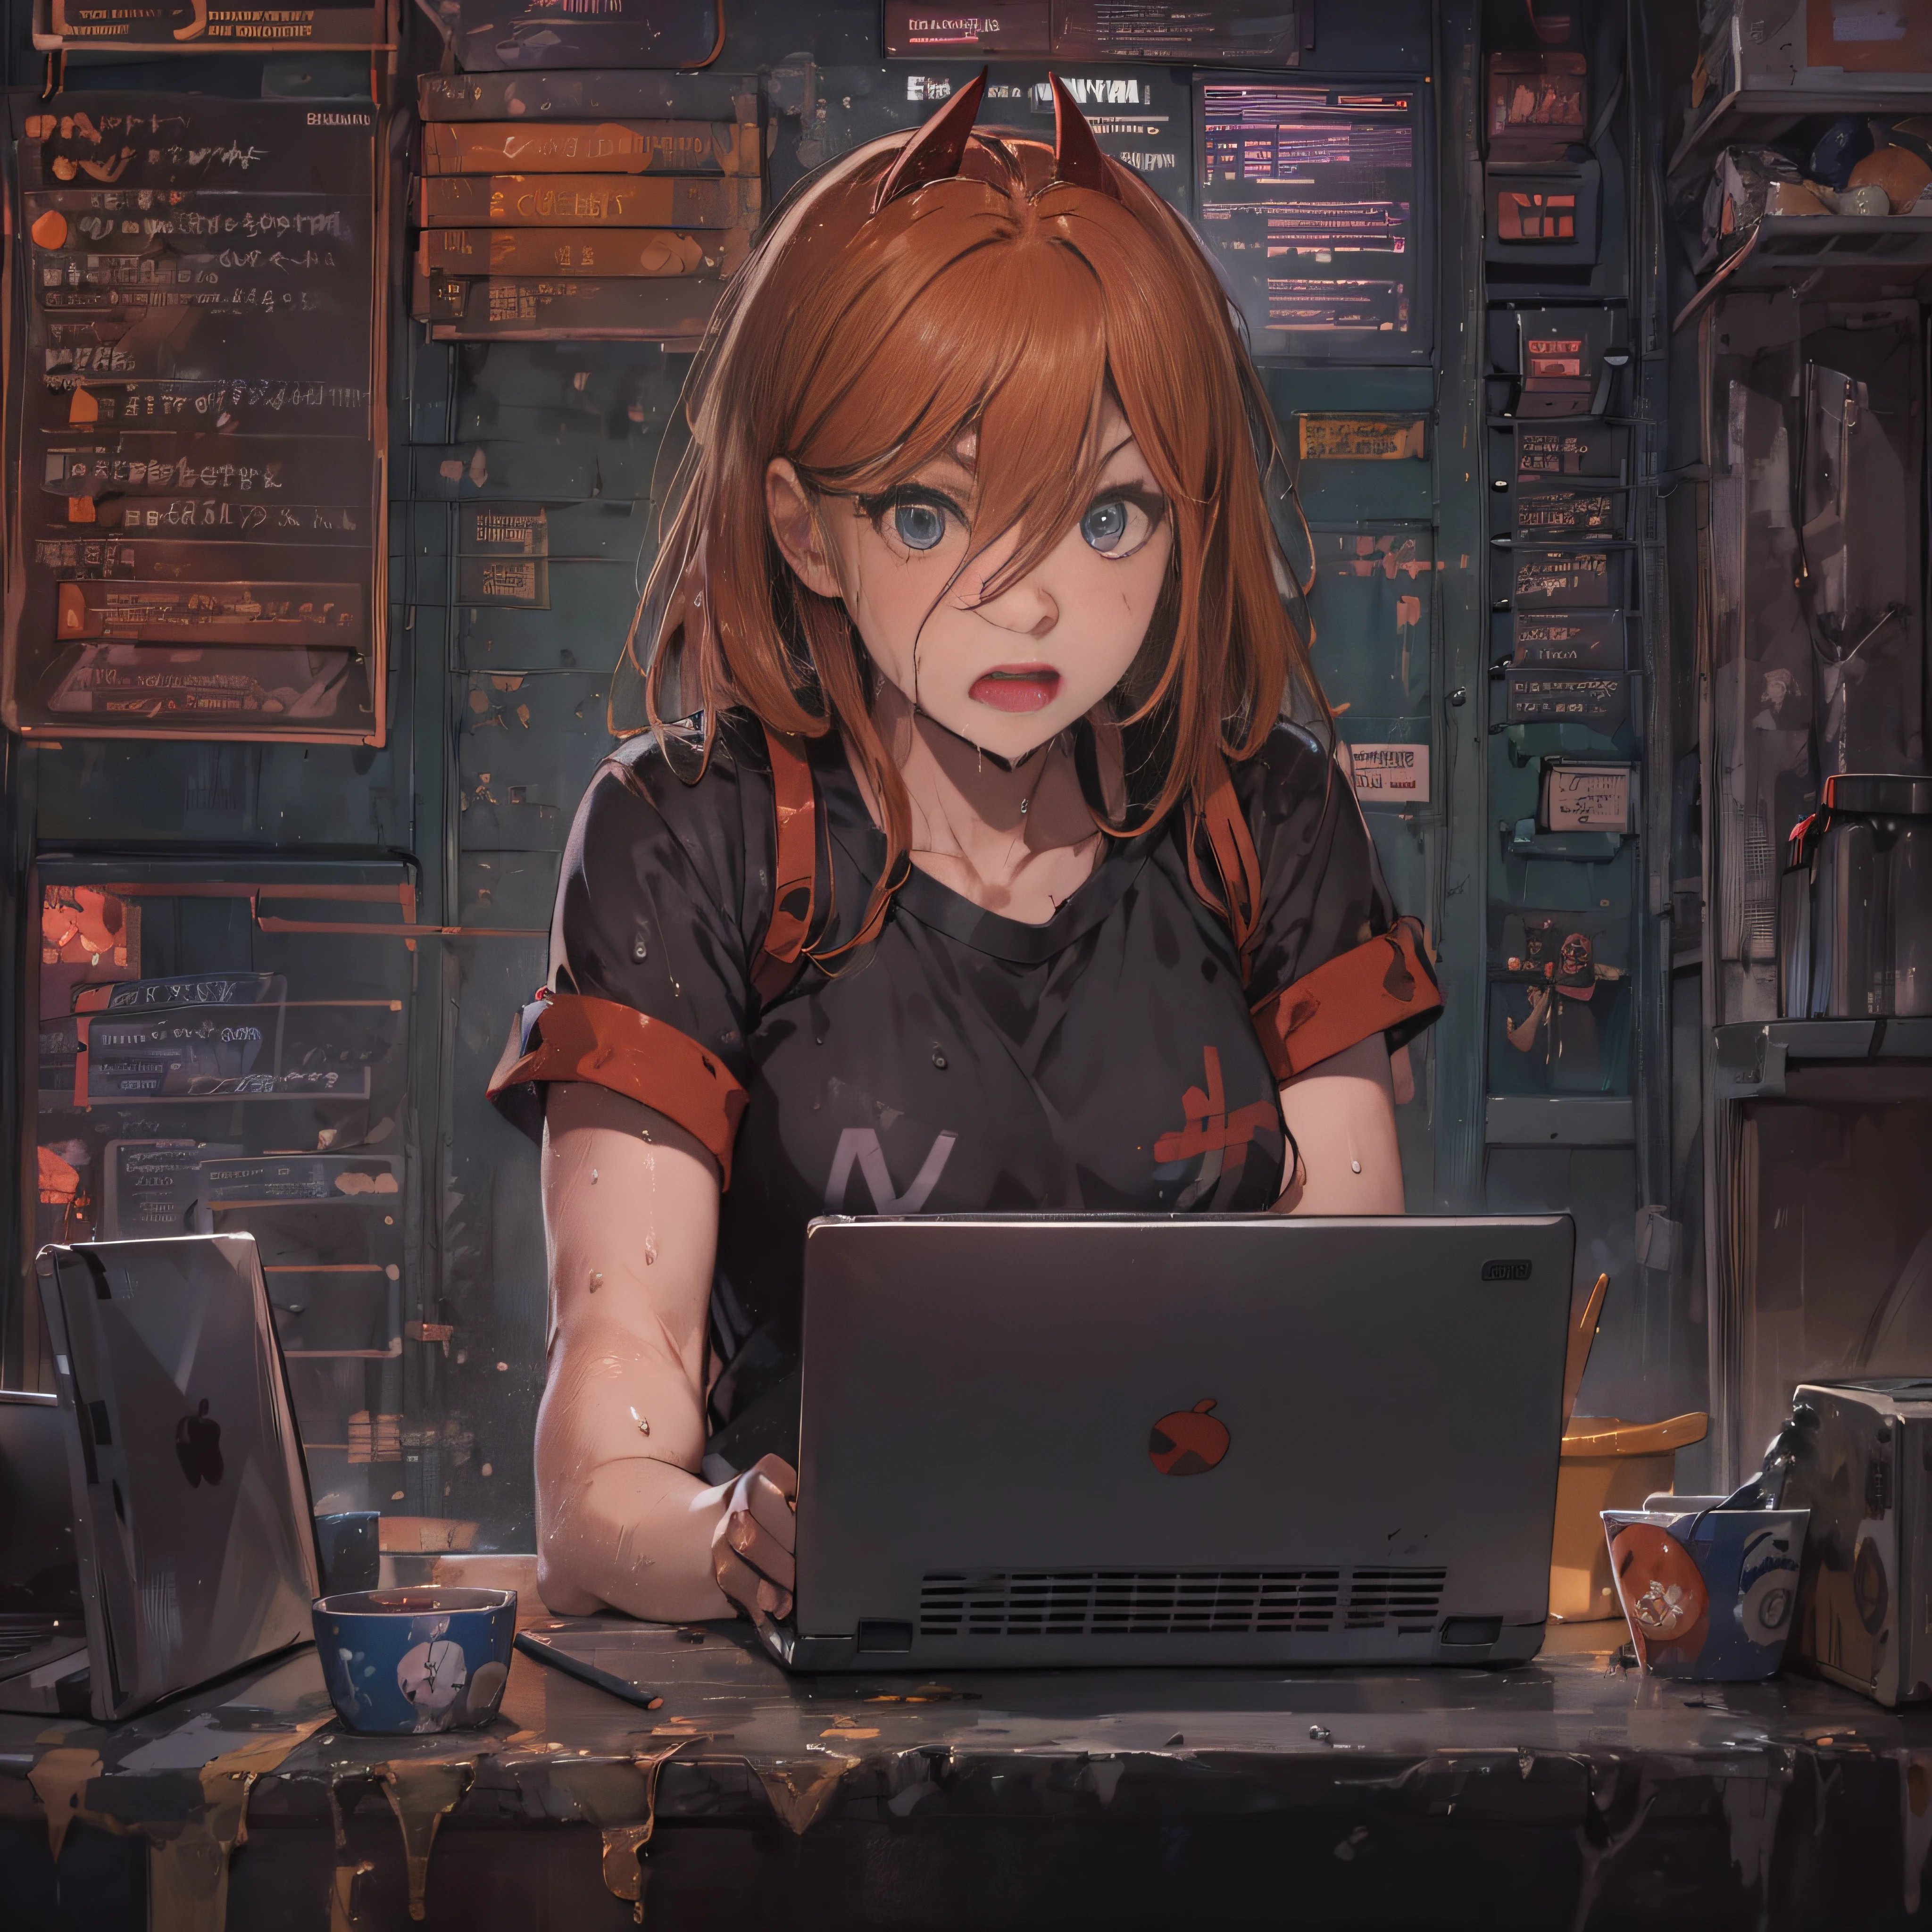 a hacker talking about cybersecurity: red hair with bangs without burrow, black shirt, black panties, wet, ervers, cyber, laptop.